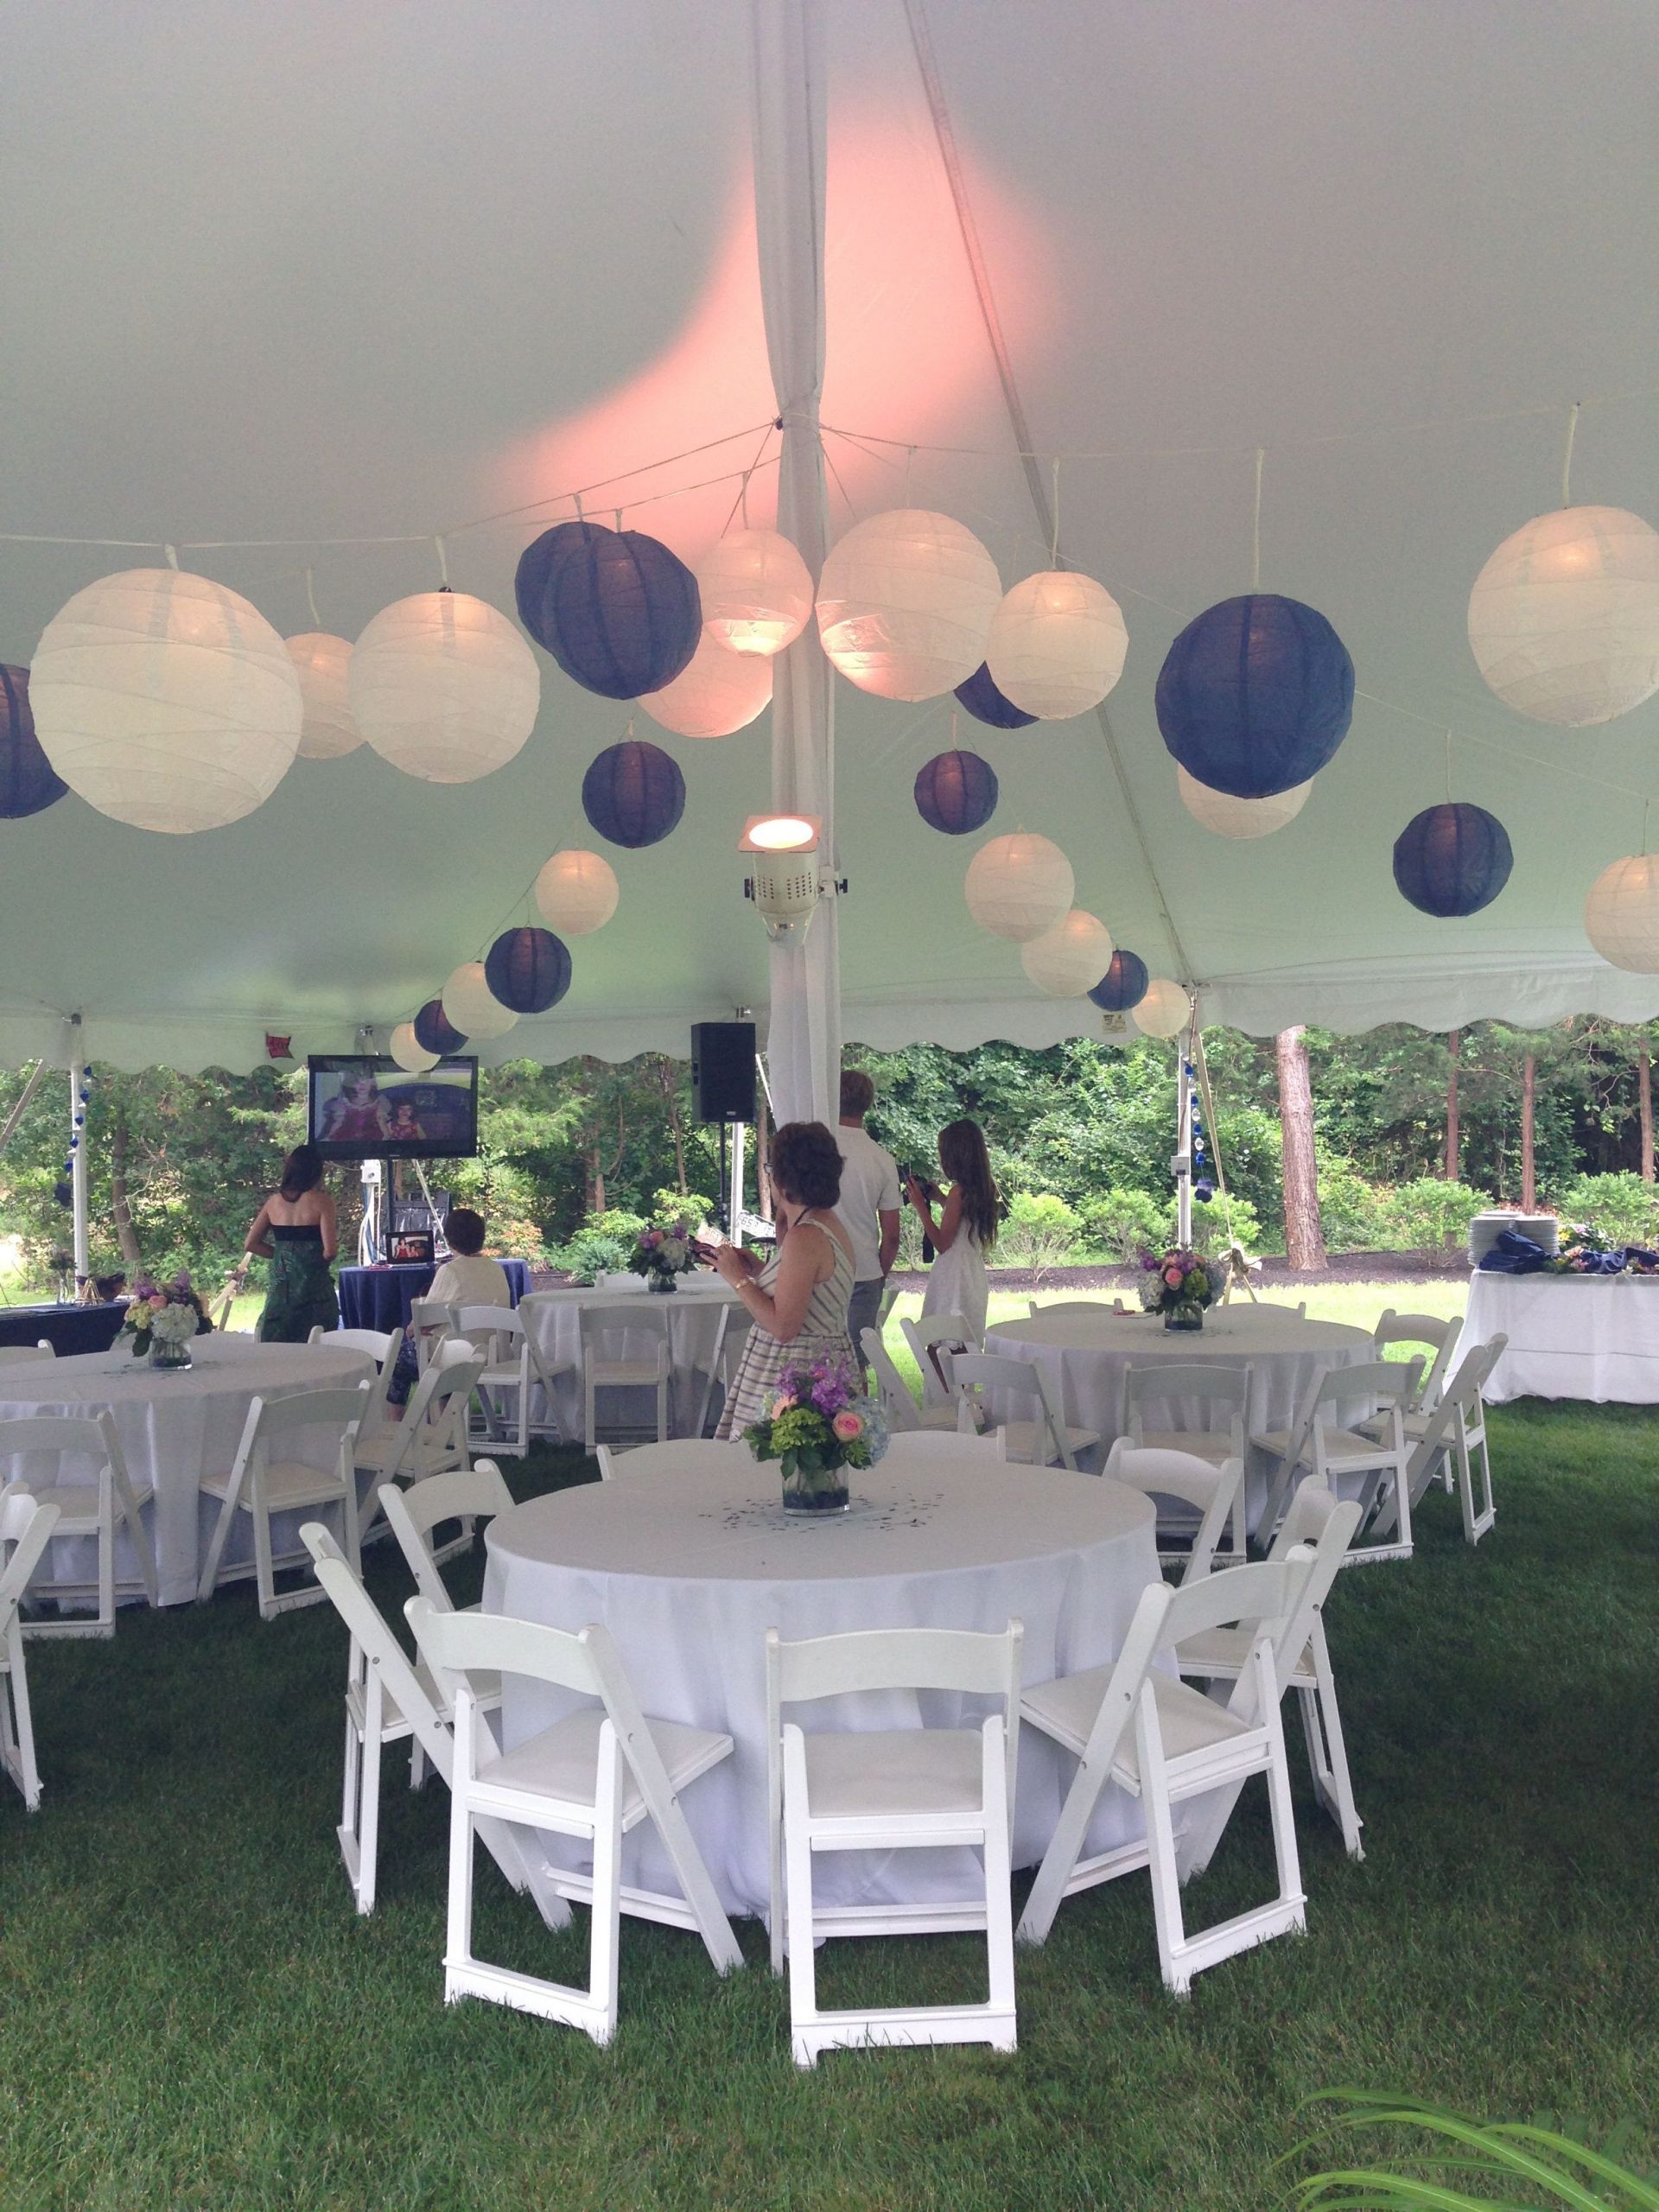 High School Graduation Backyard Party Ideas
 Tented blue and white graduation party